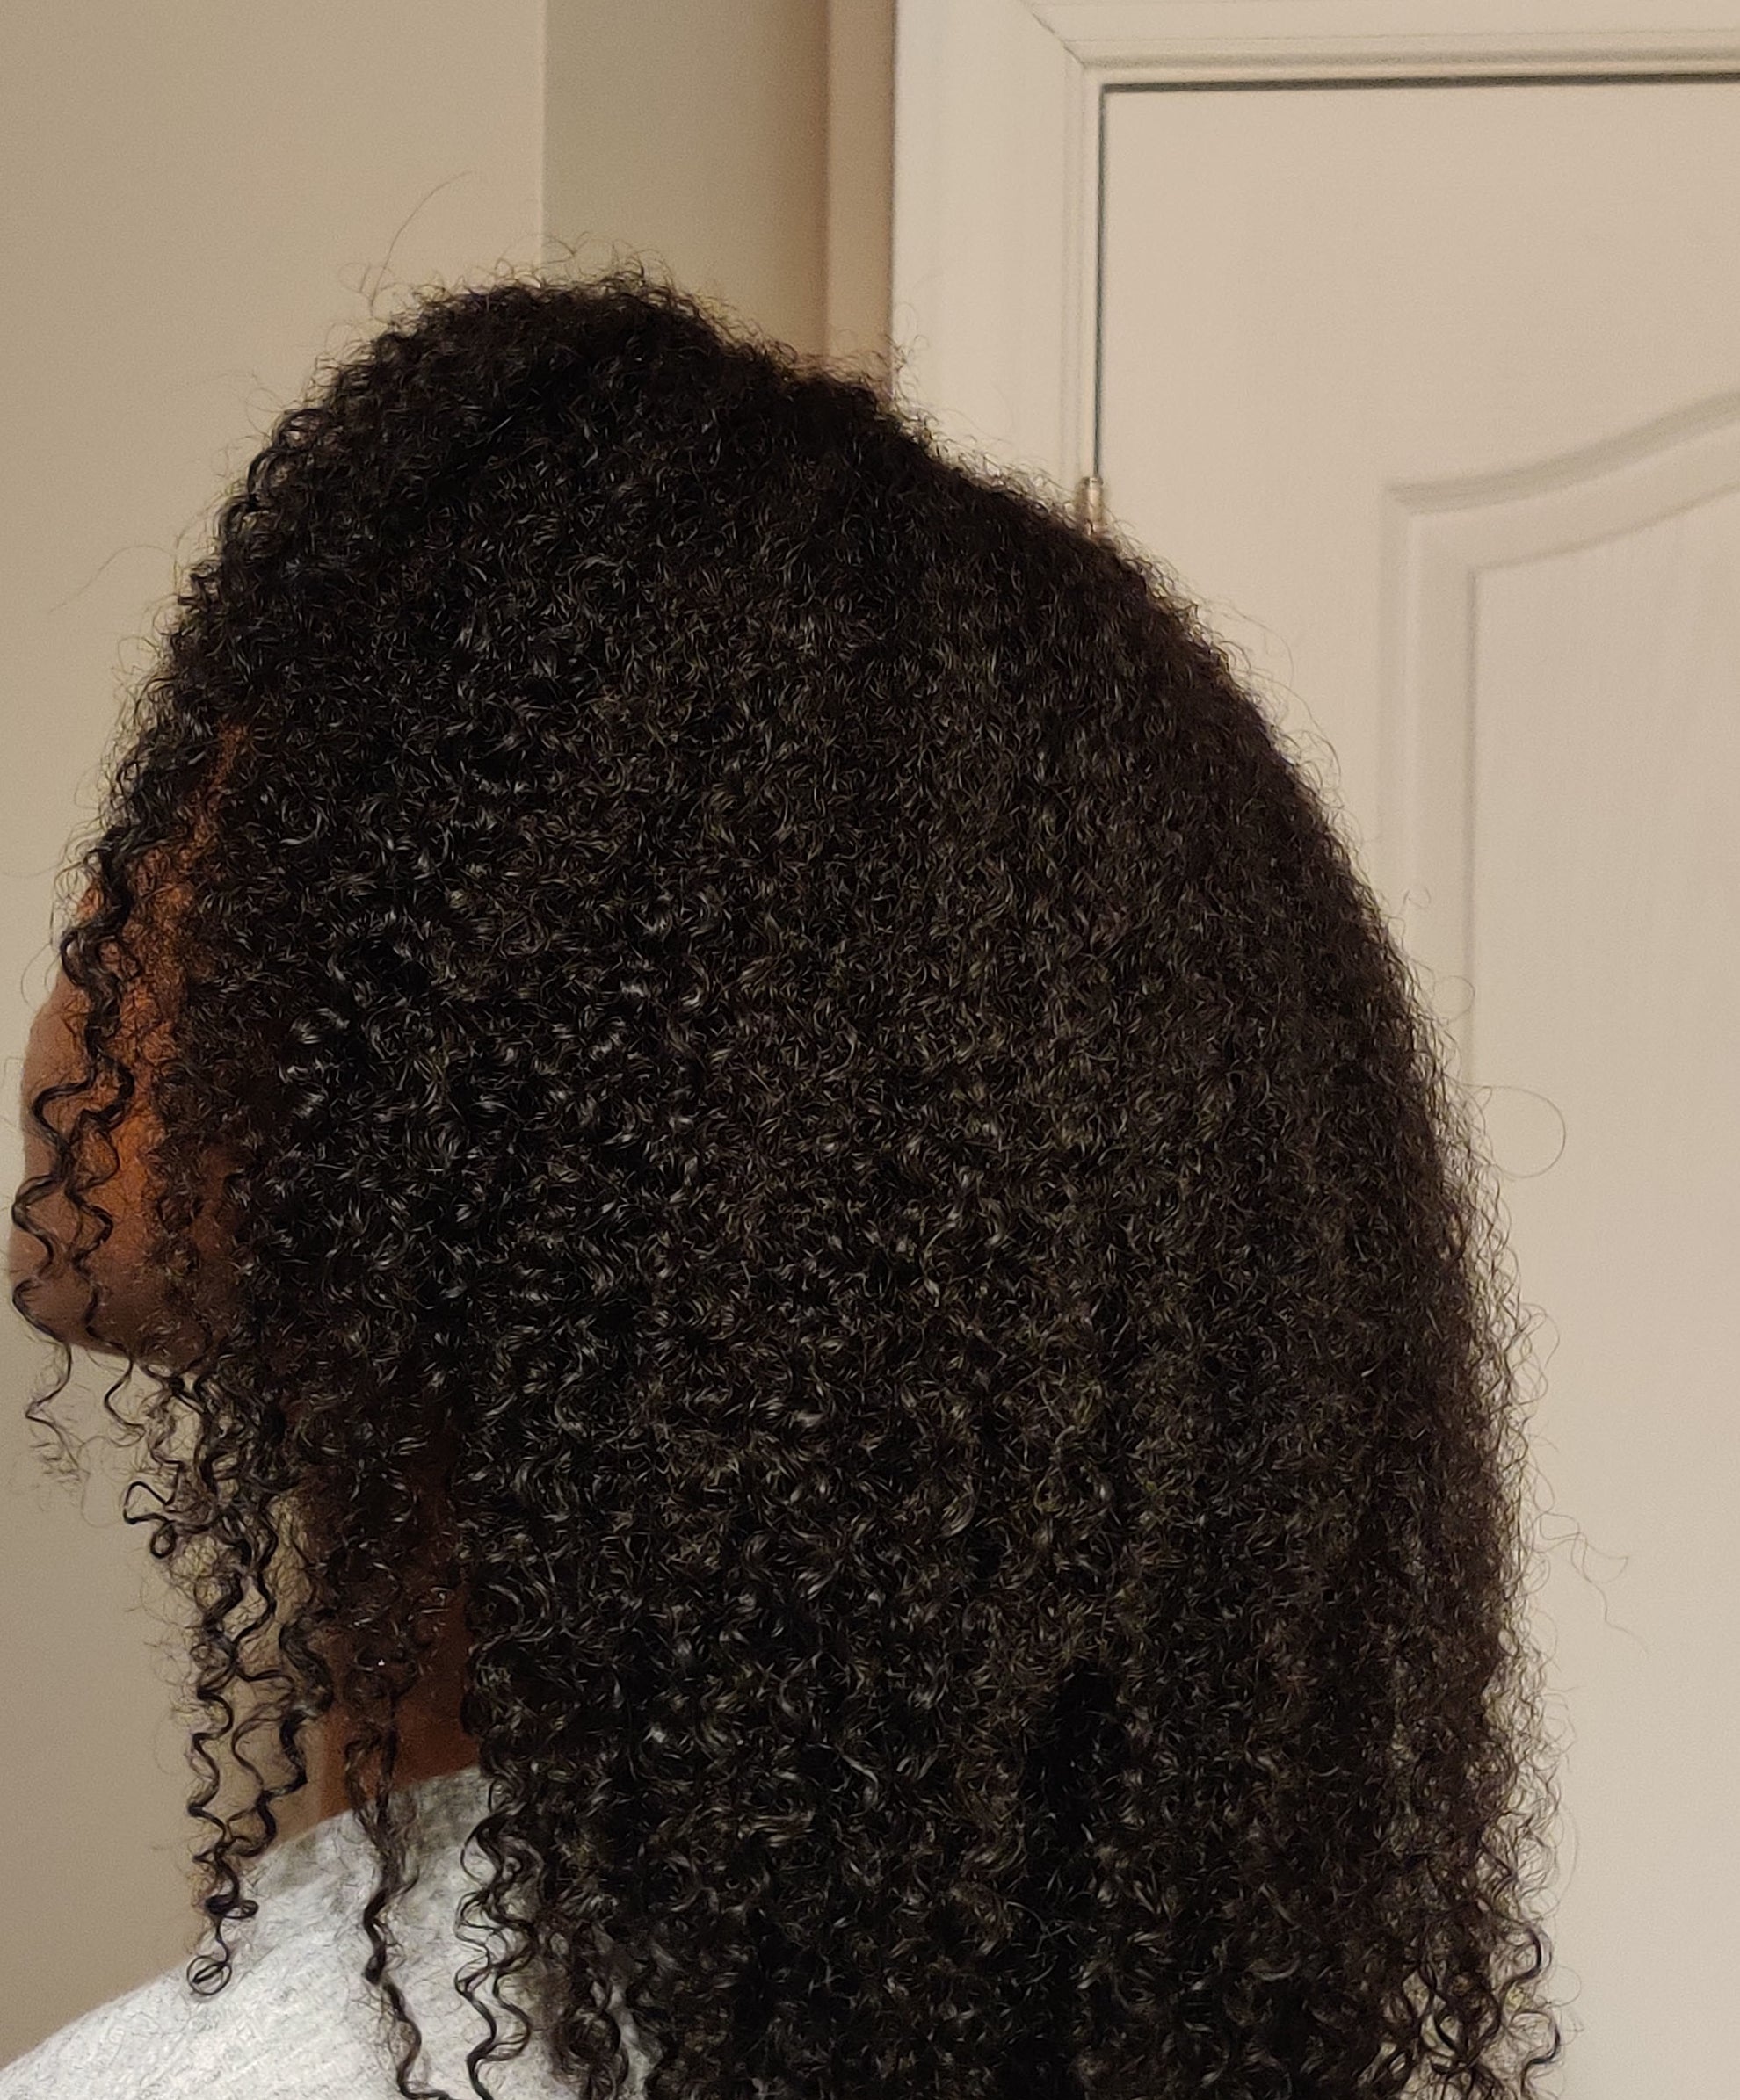 Side profile of a person with shoulder-length curly hair